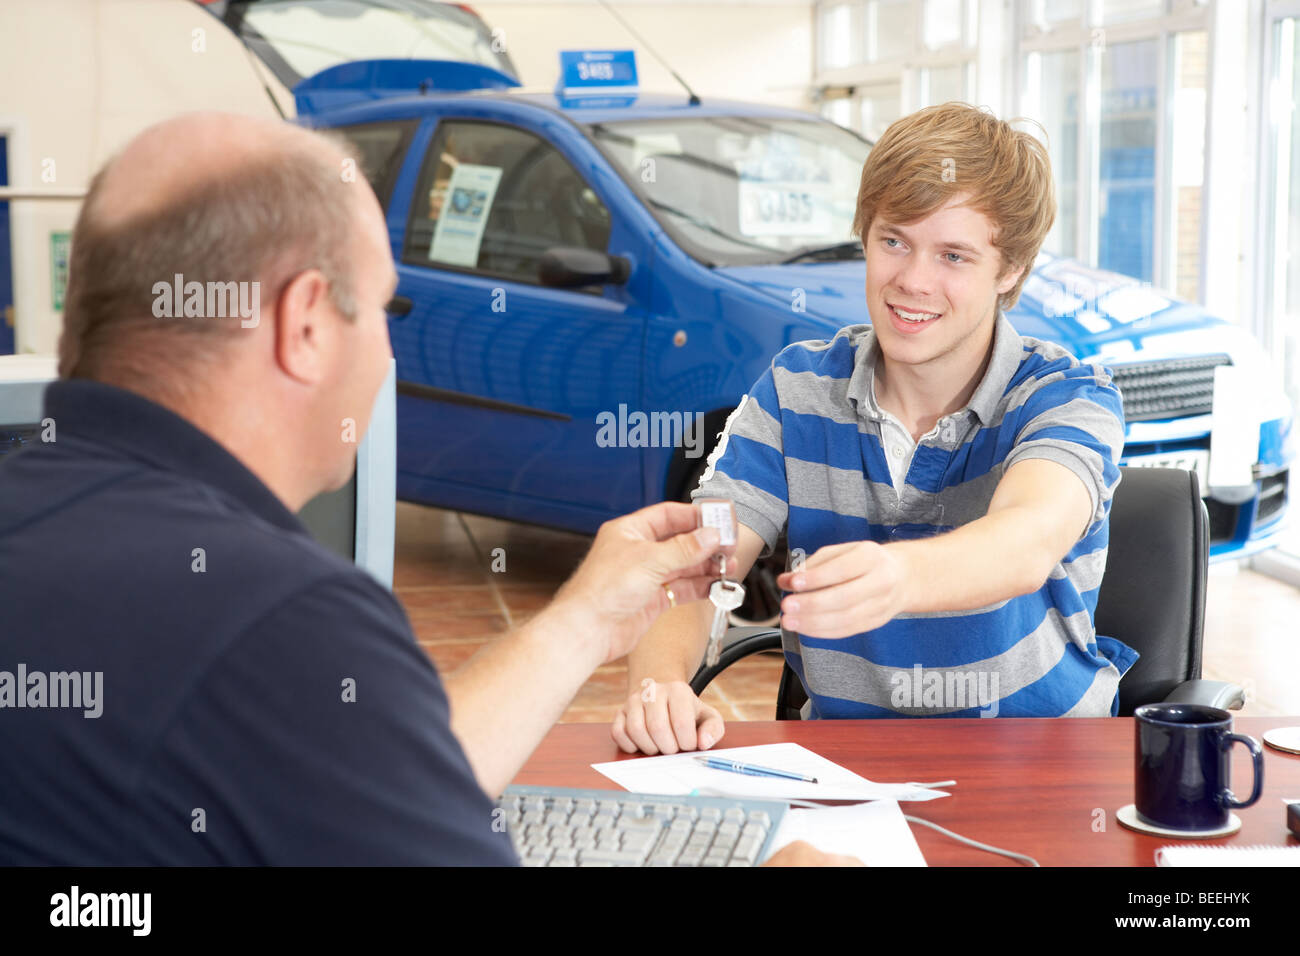 Young man filling in paperwork in car showroom Stock Photo